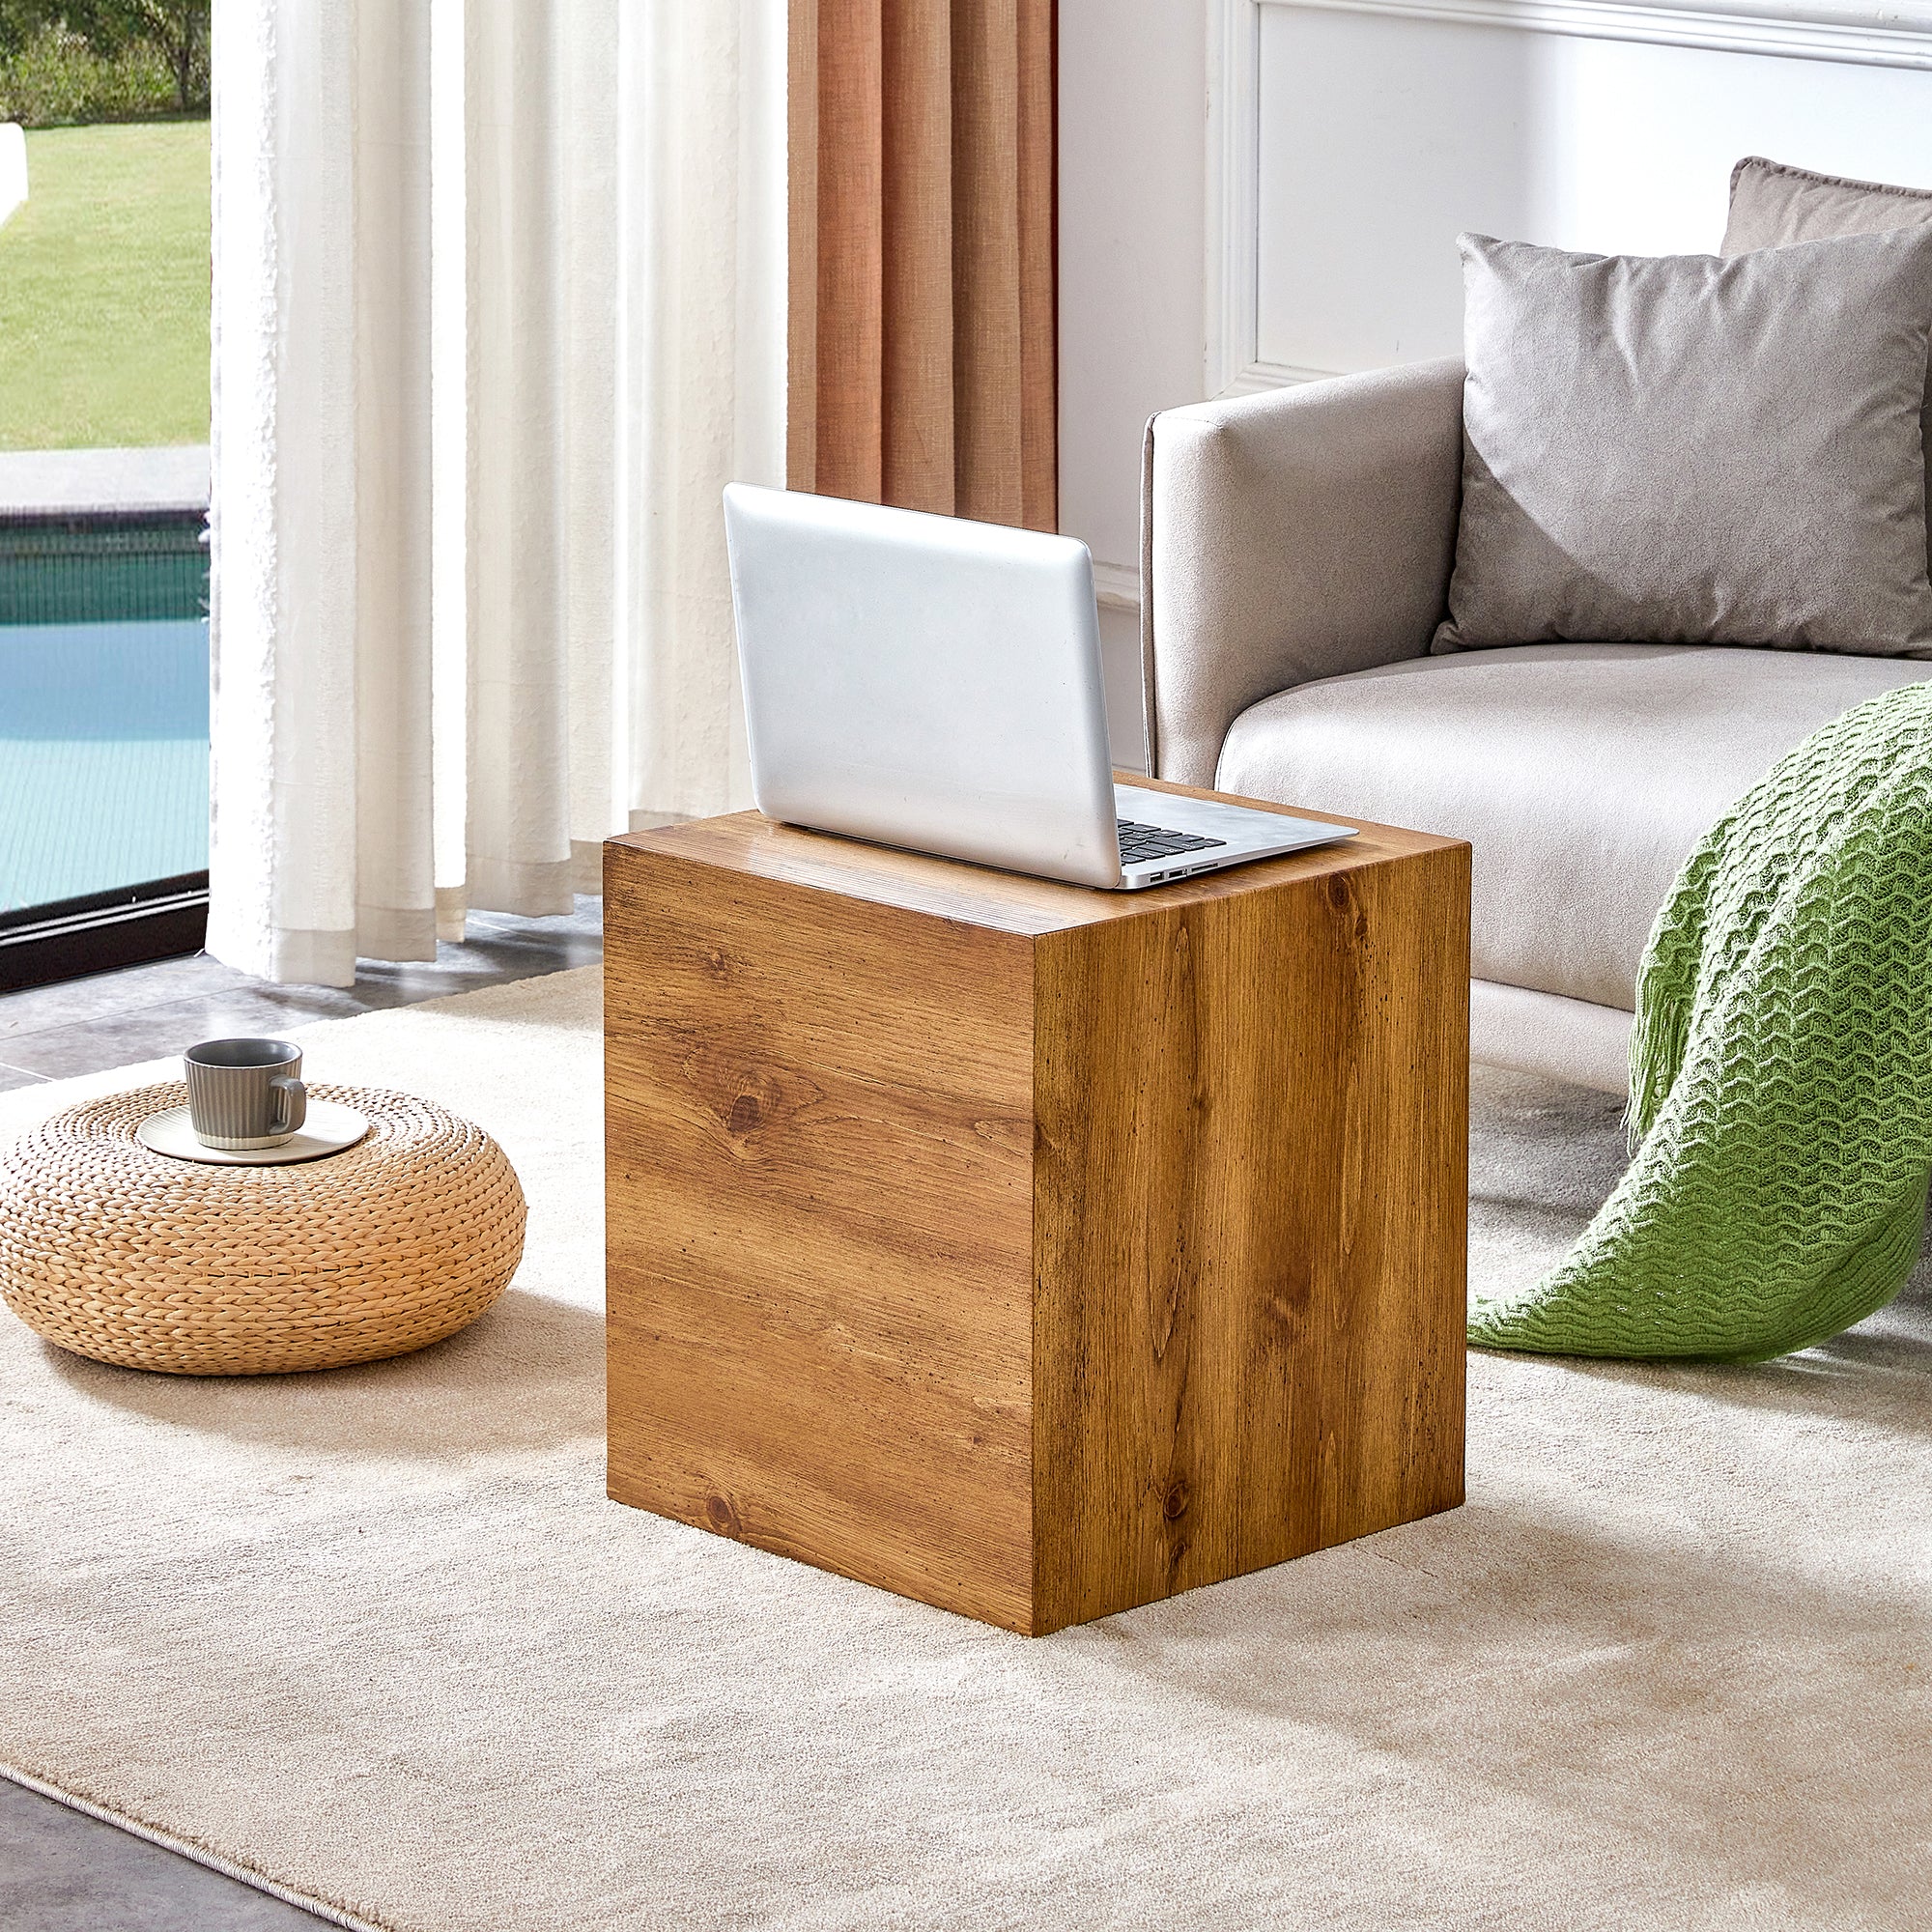 🆓🚛 Modern & Practical Coffee Table Made of Wood Grain Density Board Material 15.7"X15.7"X17.7", Natural